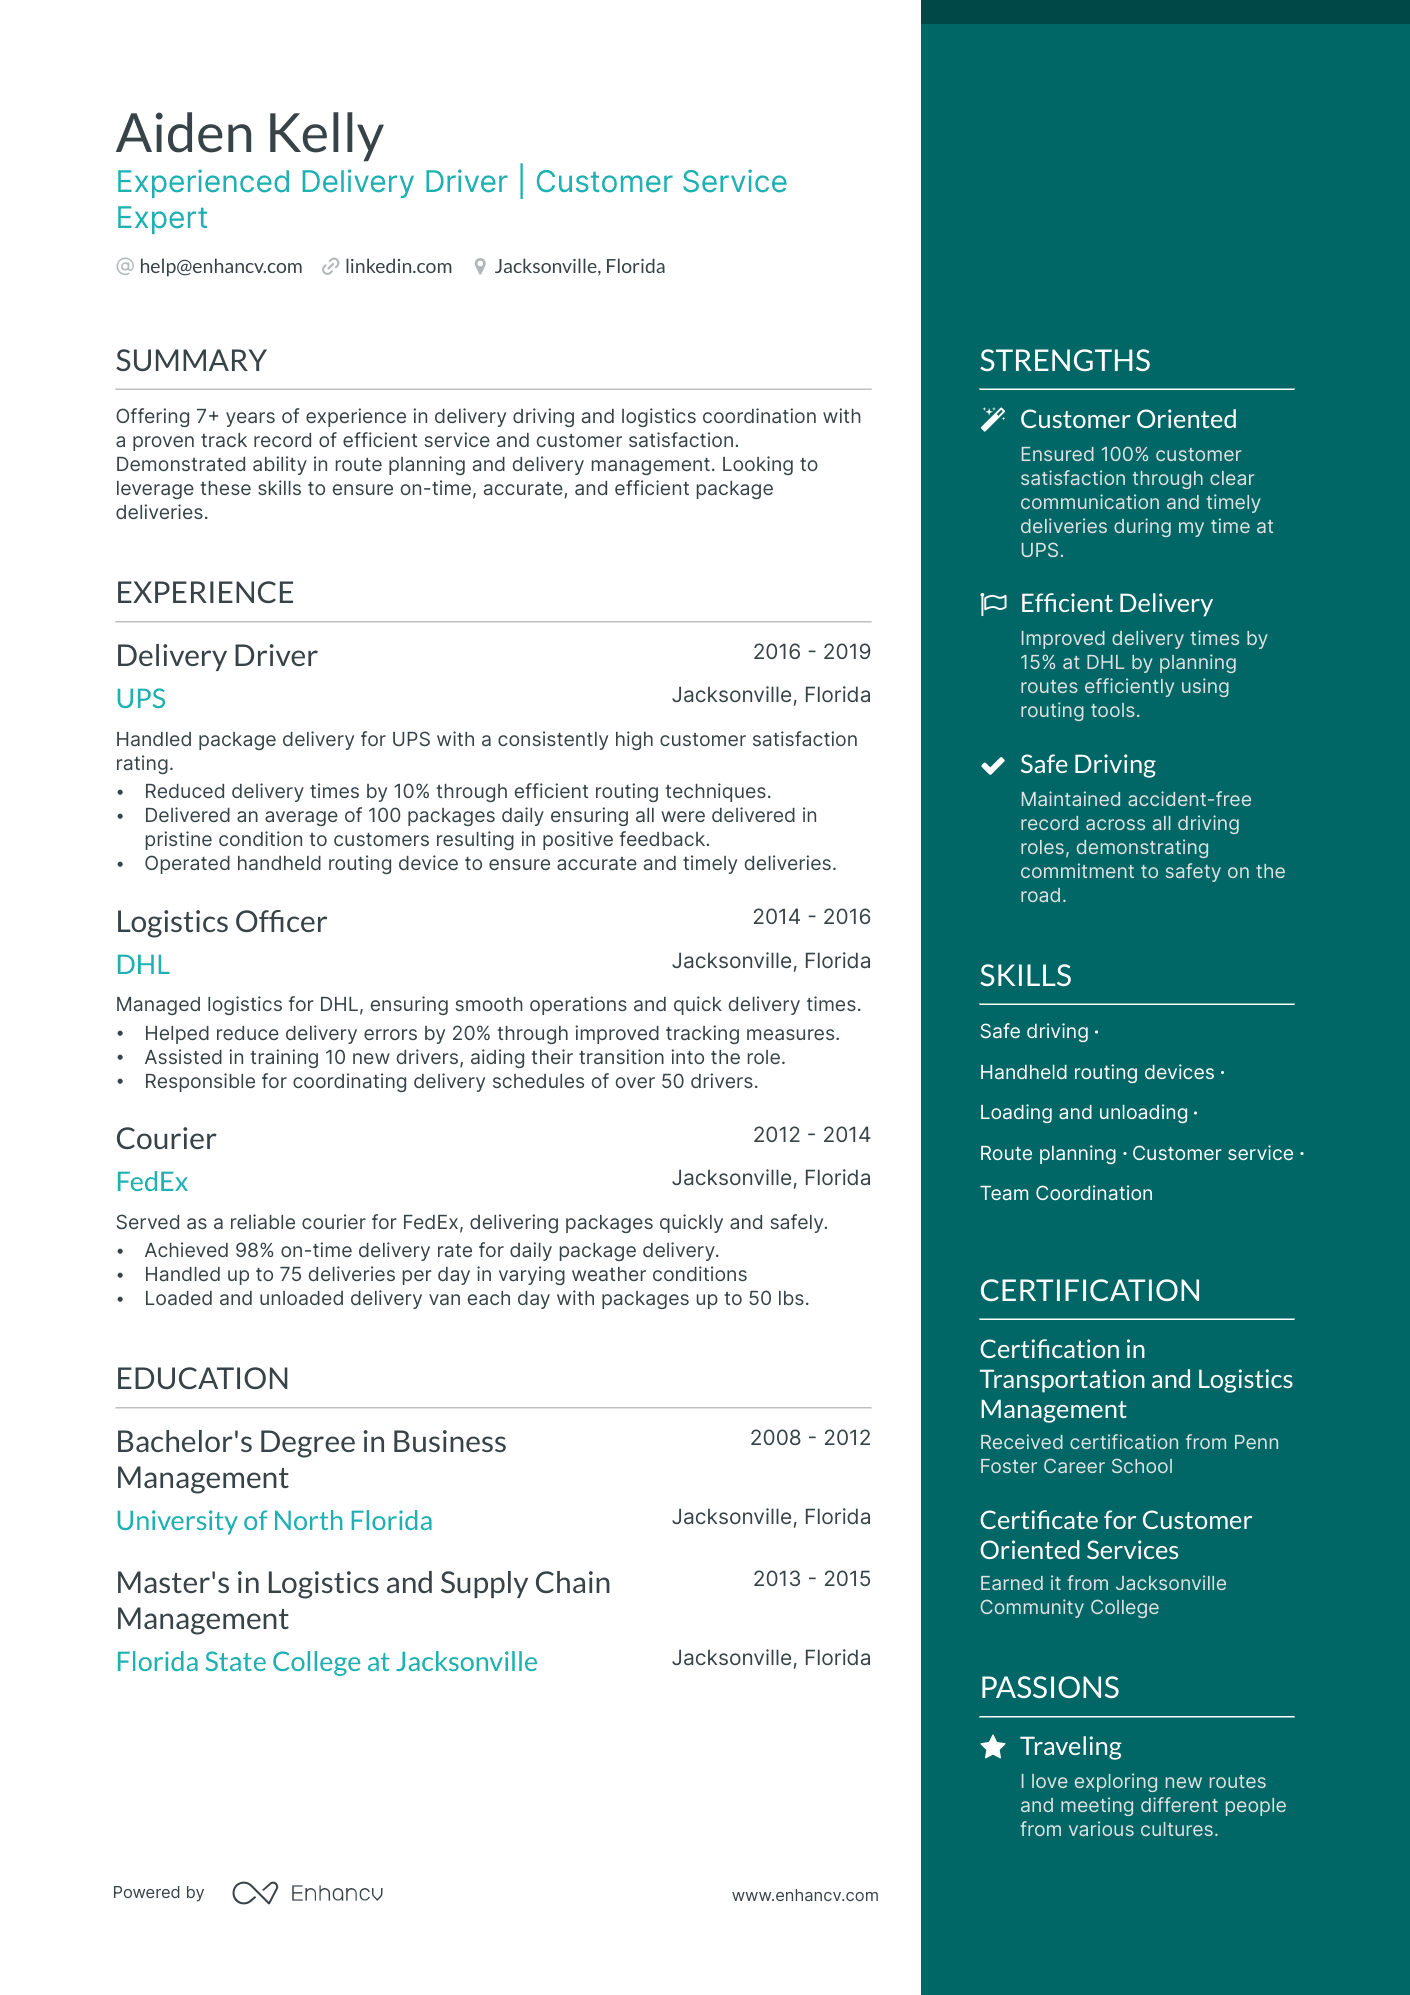 sample resume for amazon delivery driver